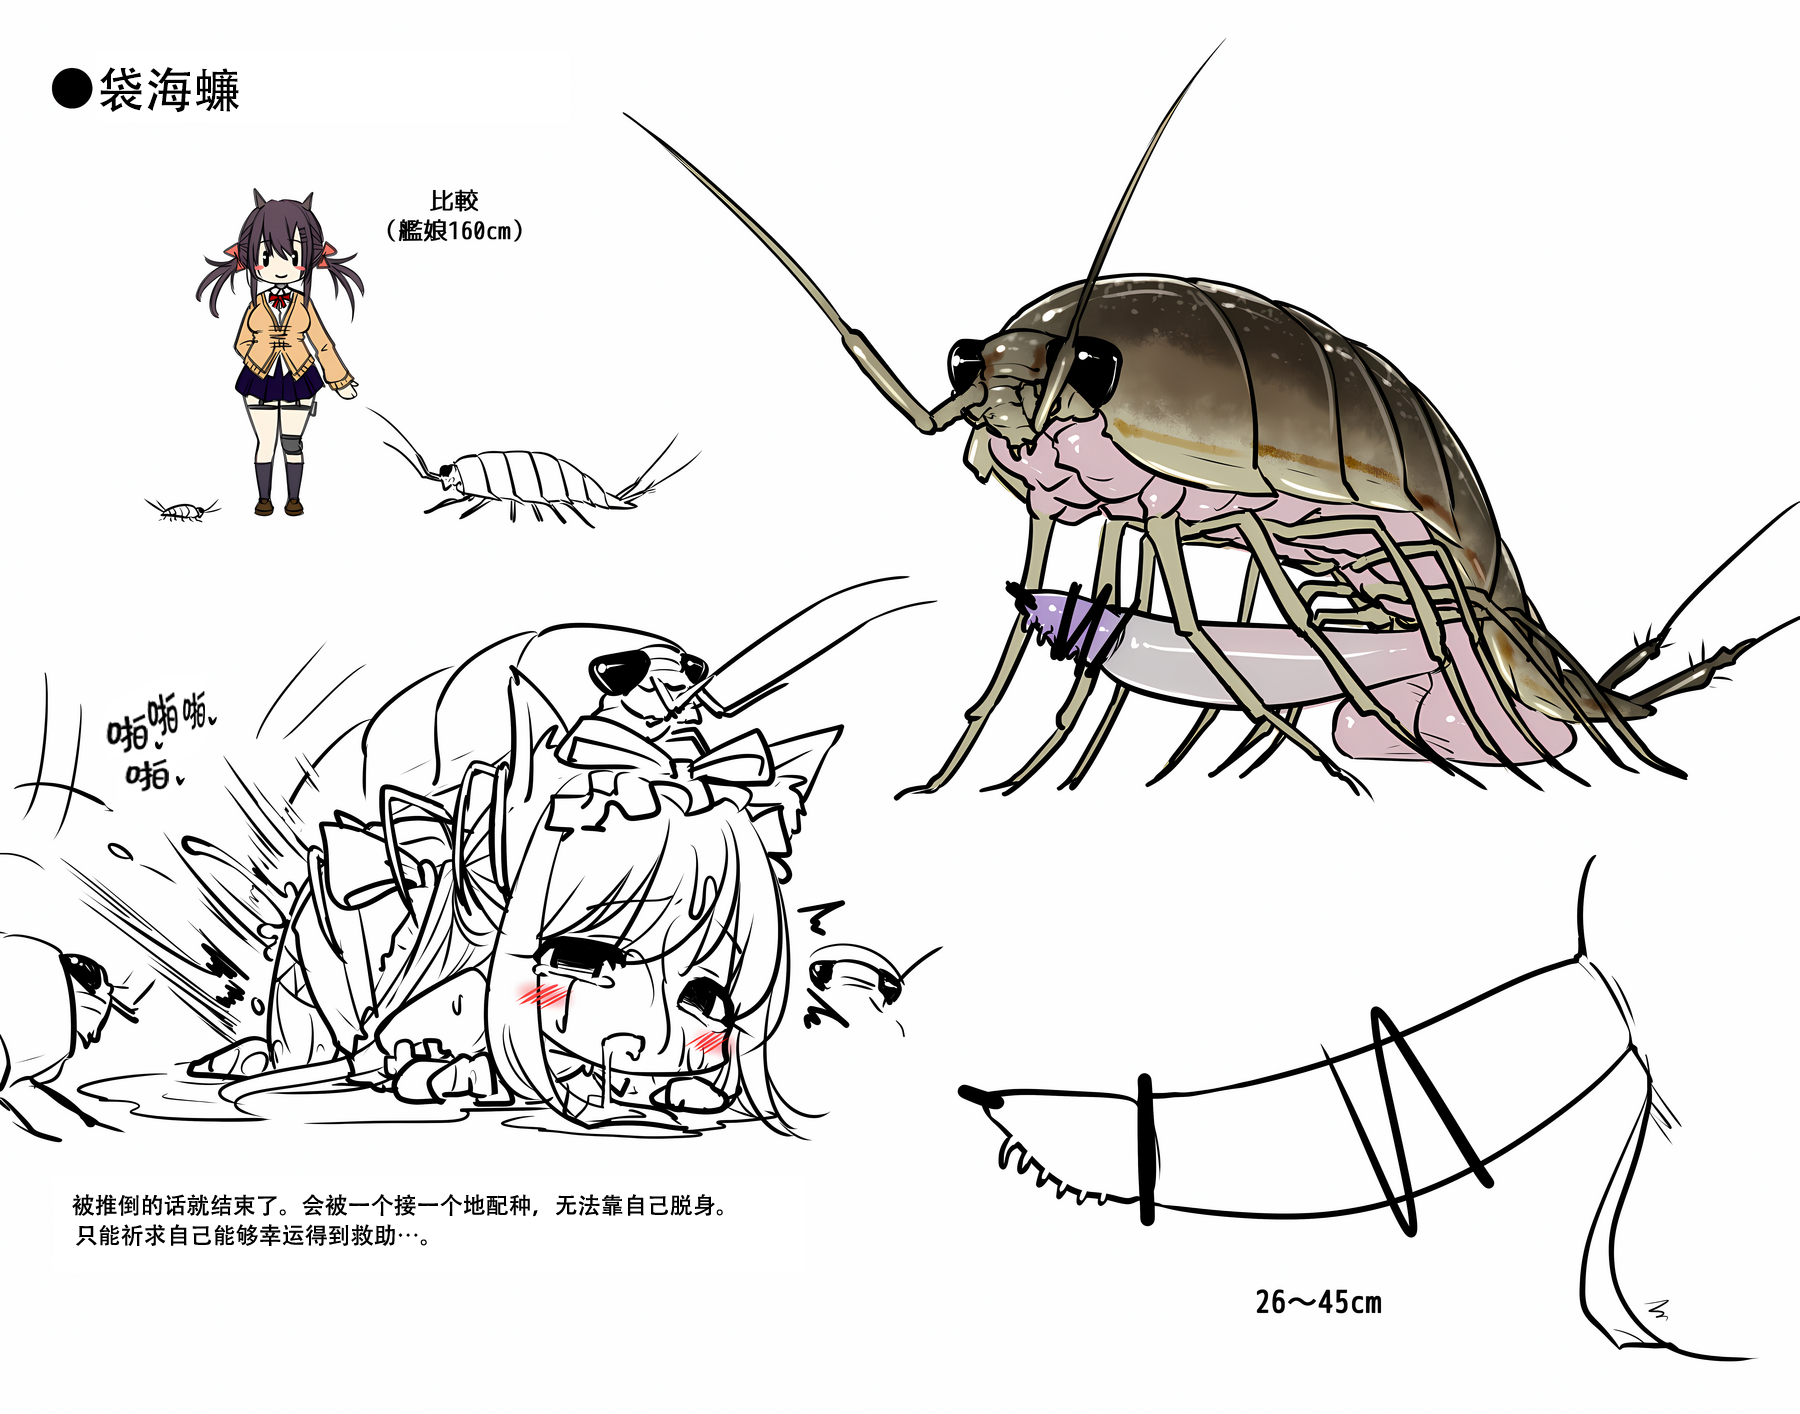 [Gall] Azur Lane Insect Encyclopedia [Chinese] [小皮孩机翻润色汉化] - Page 17